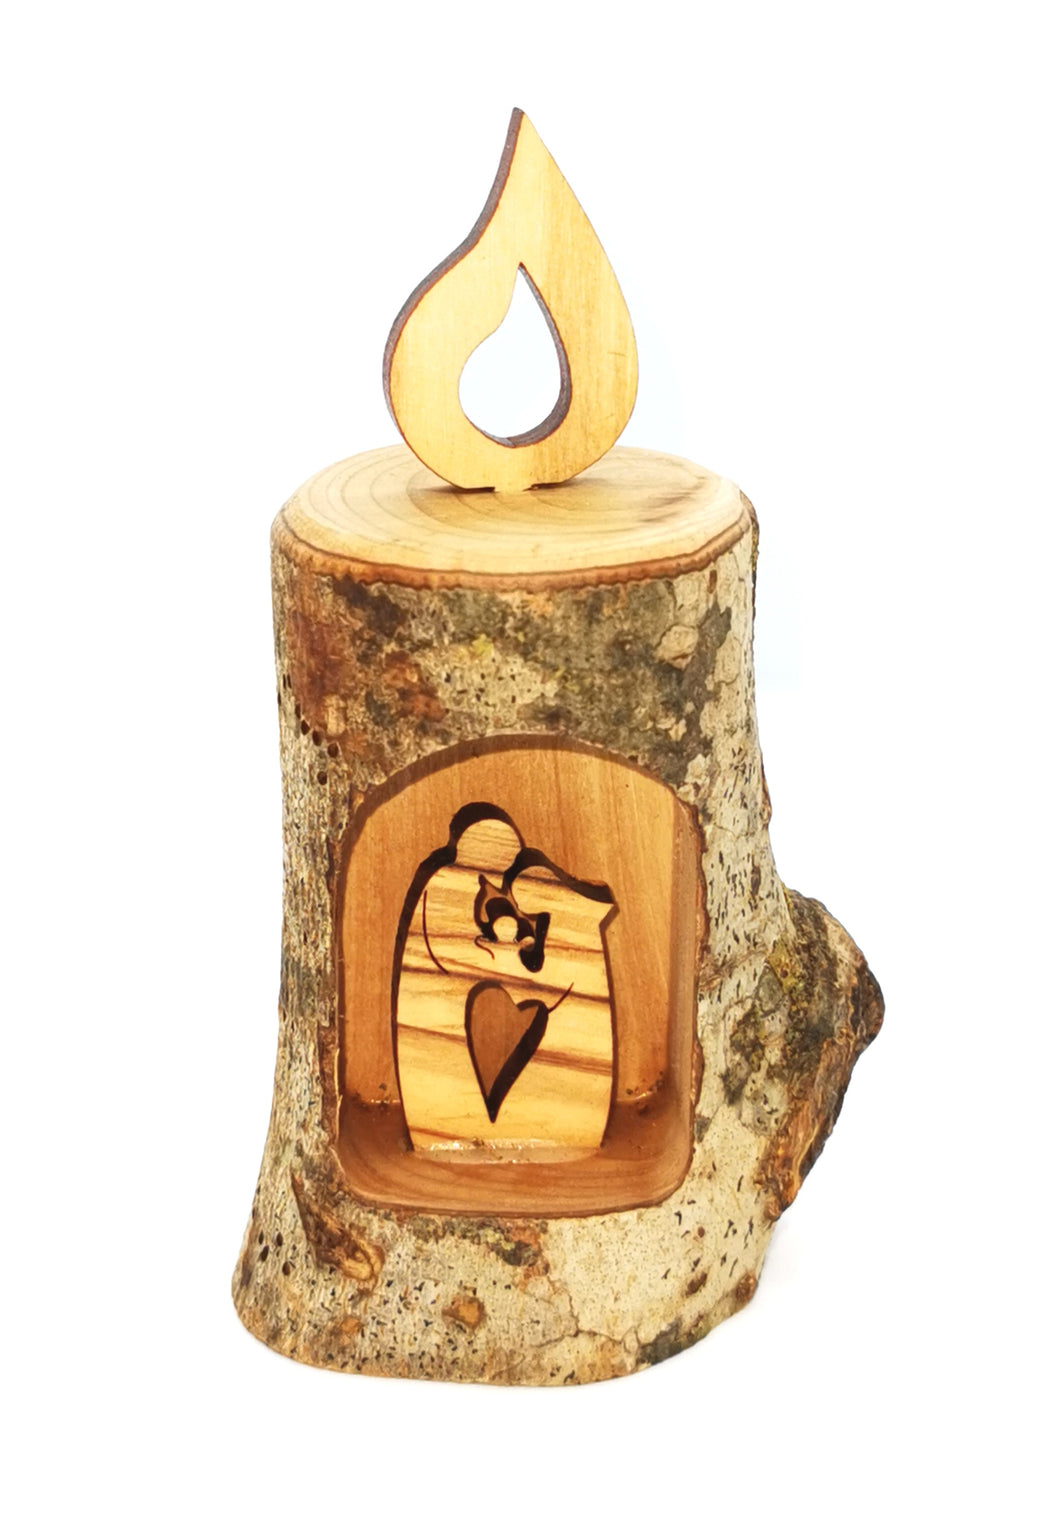 Mary, Joseph, Baby Jesus, loving family in candle shaped ornament. Hand made in natural olive branch with bark